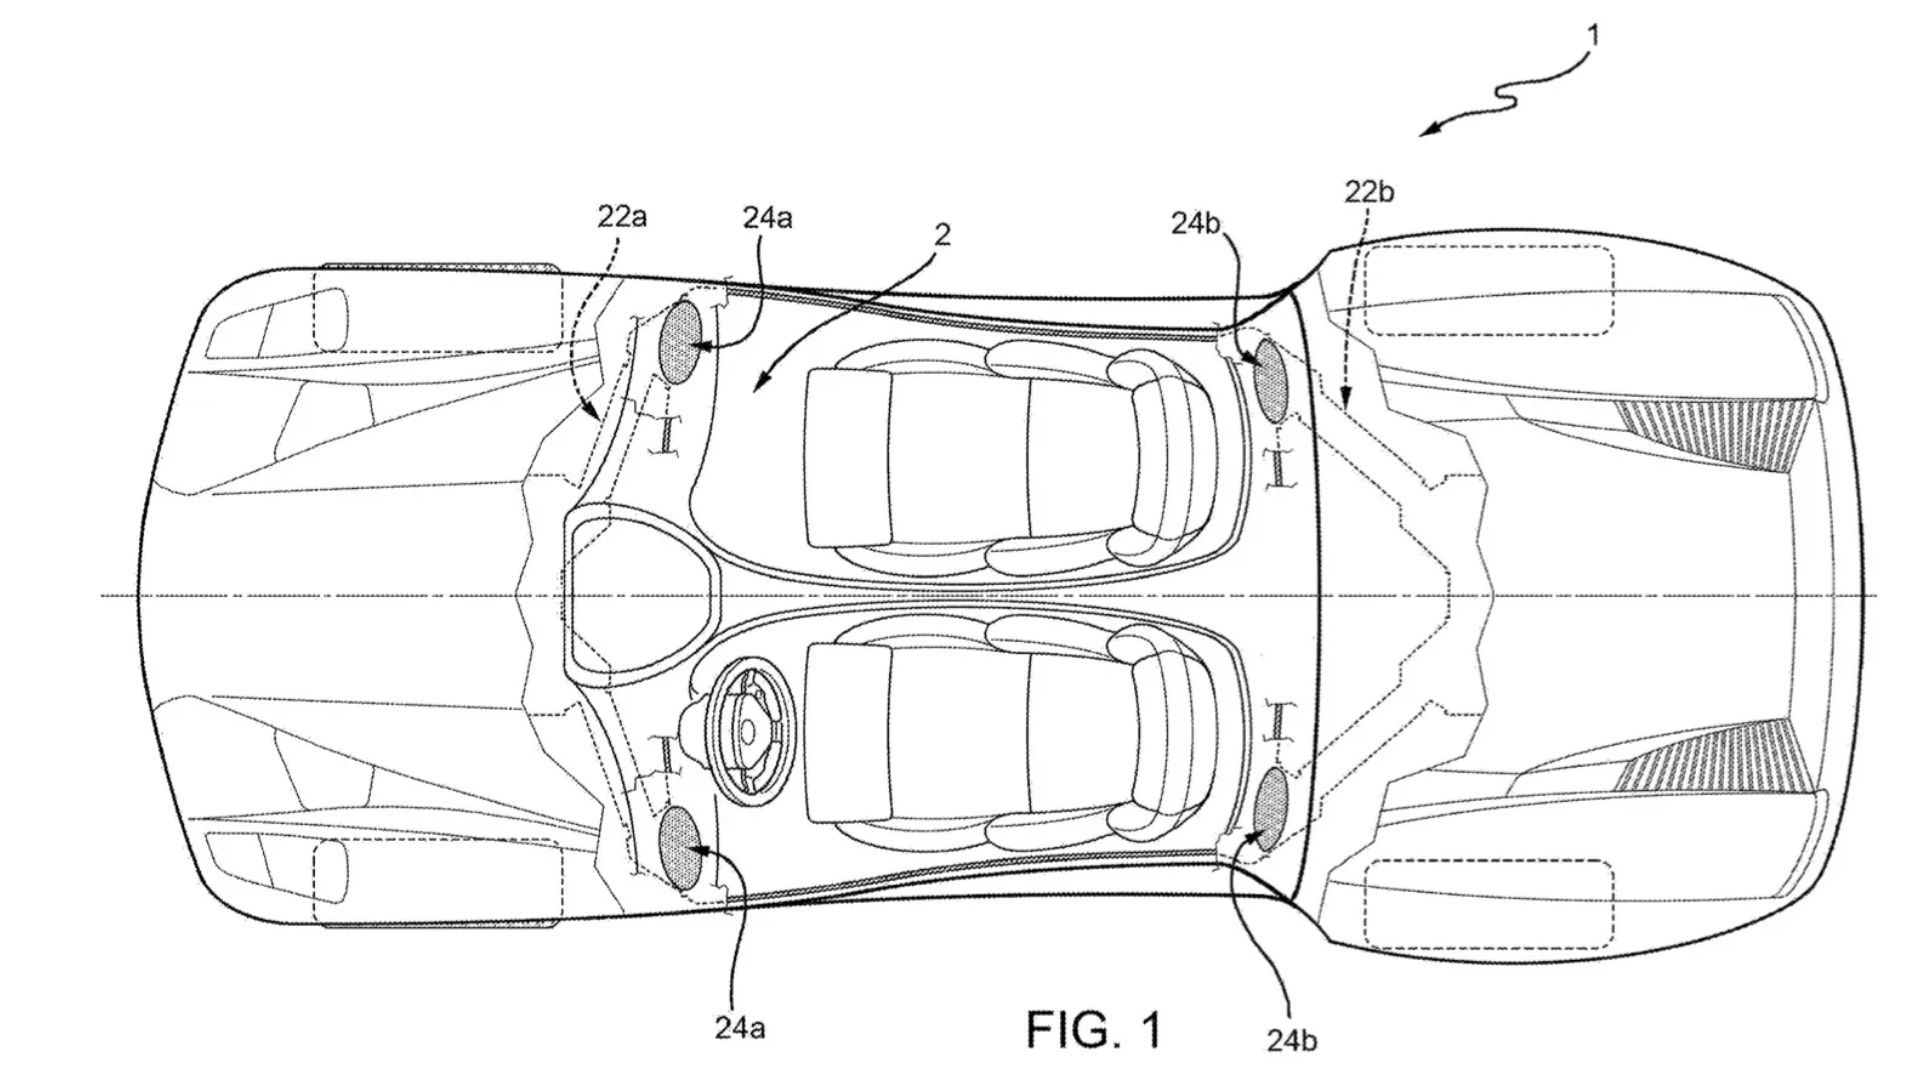 Ferrari's Patents Reveal Innovative Sound Solutions for Future Electric Vehicles